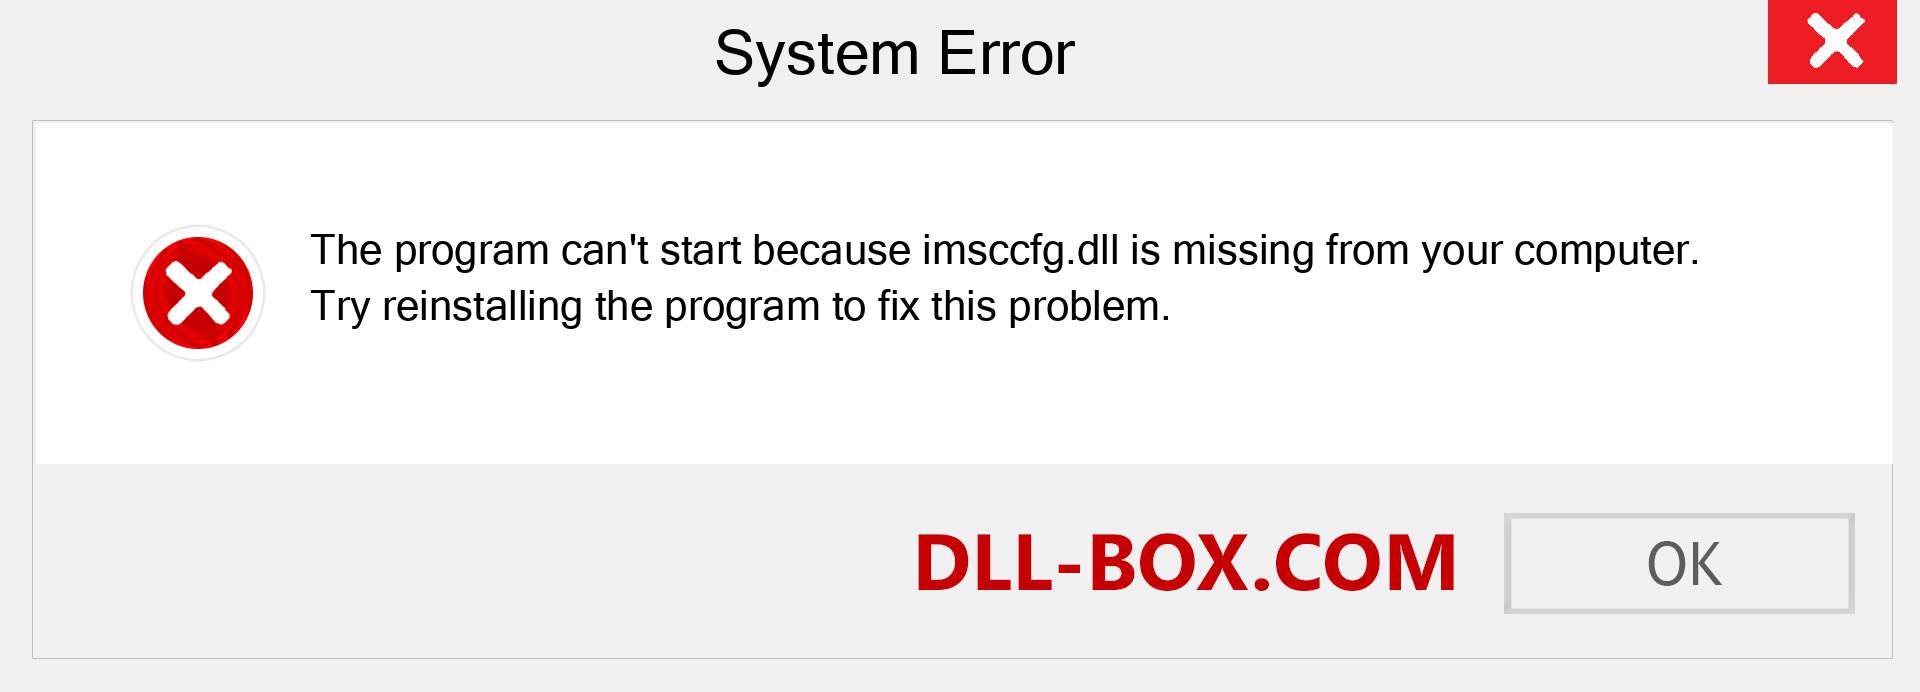  imsccfg.dll file is missing?. Download for Windows 7, 8, 10 - Fix  imsccfg dll Missing Error on Windows, photos, images